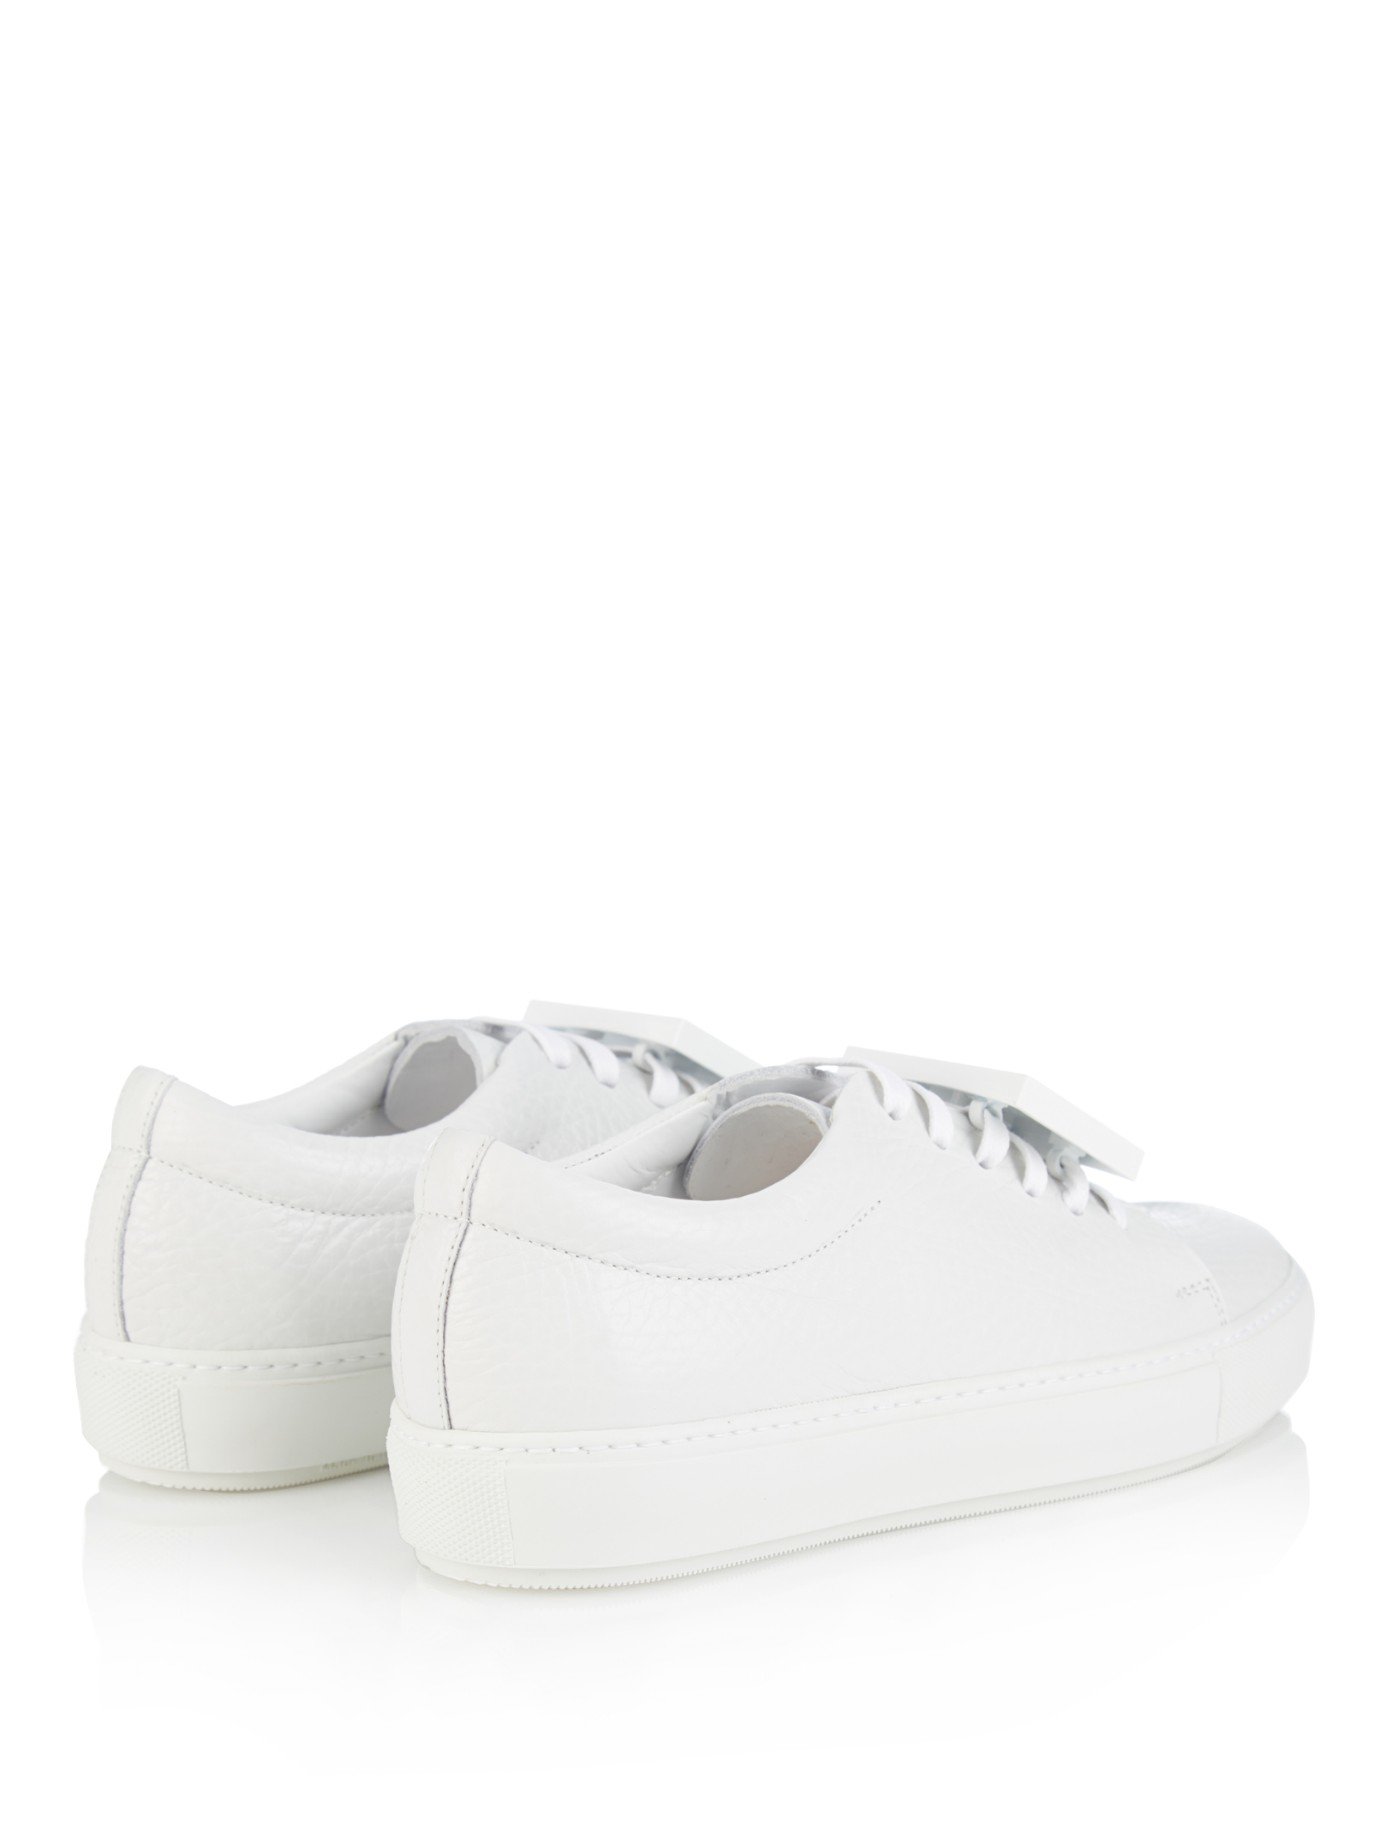 Acne Studios Adriana Smiley-Face Grained-Leather Sneakers in White | Lyst